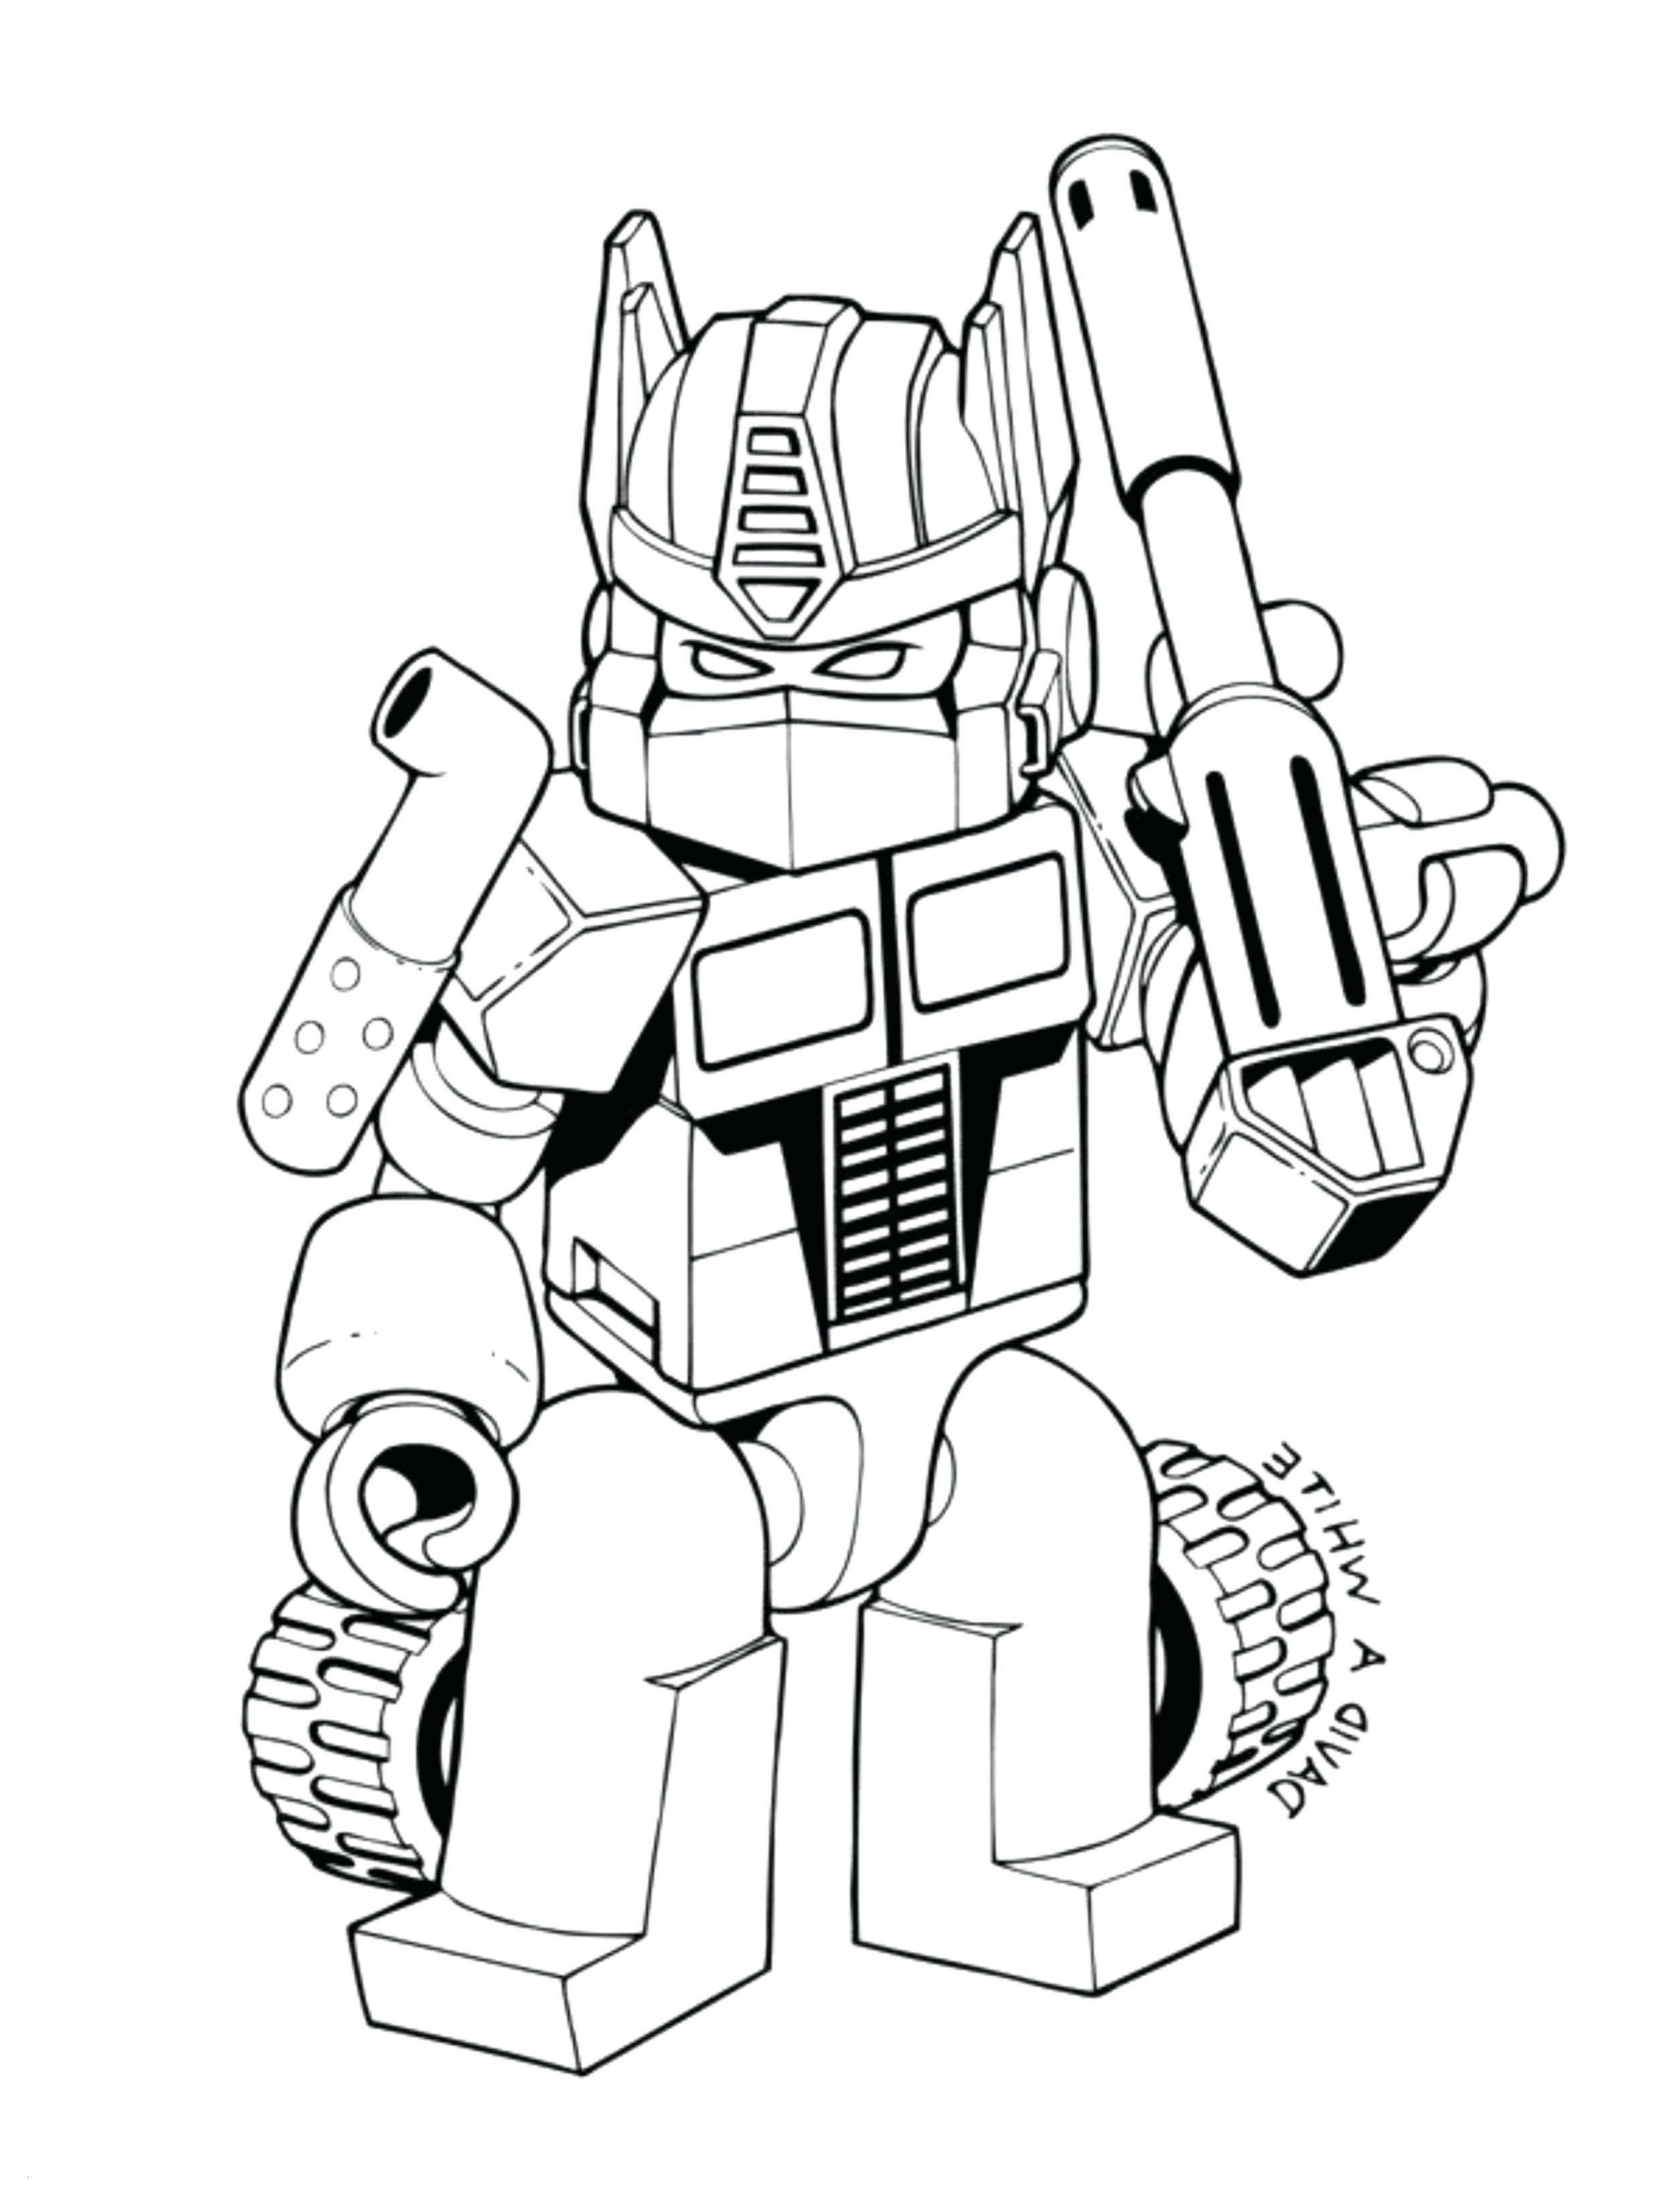 Printable Transformers Coloring Pages Astonishing Transformers Coloring Pages Printable Transformer